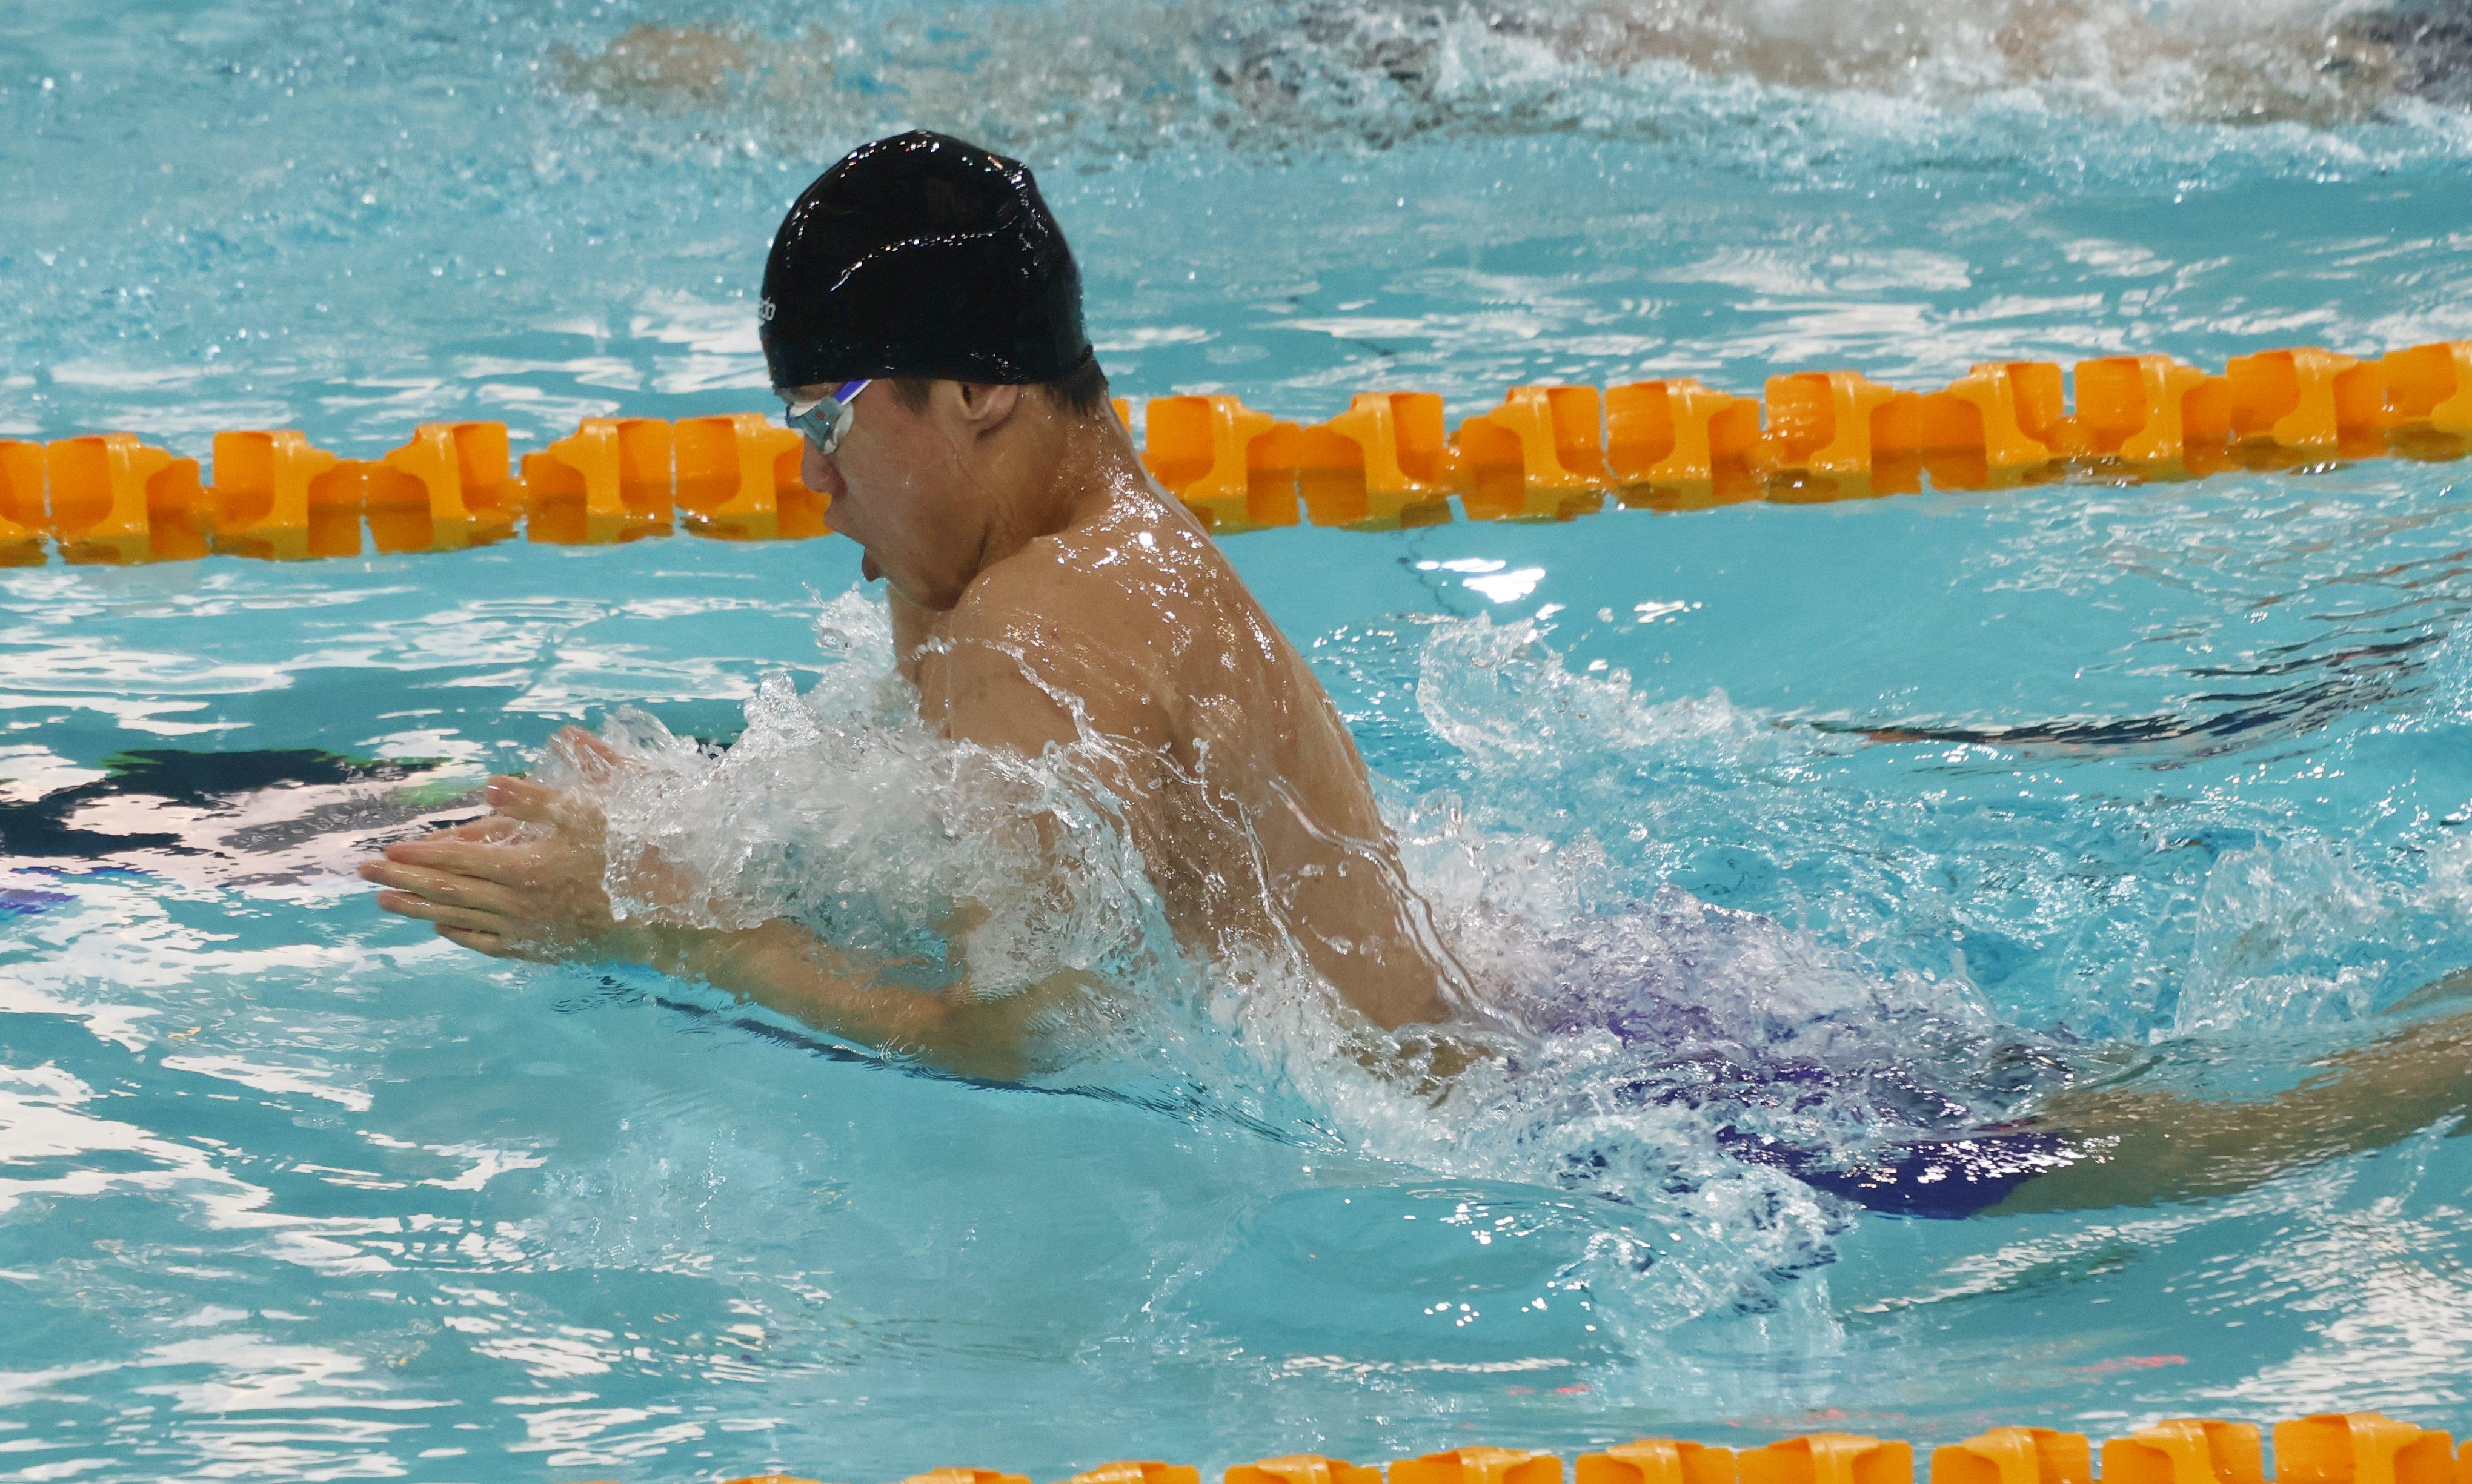 Teen swimmer Adam Mak won the Division 1 Age Group Short Course Competition on Sunday. Photo: Shirley Chui